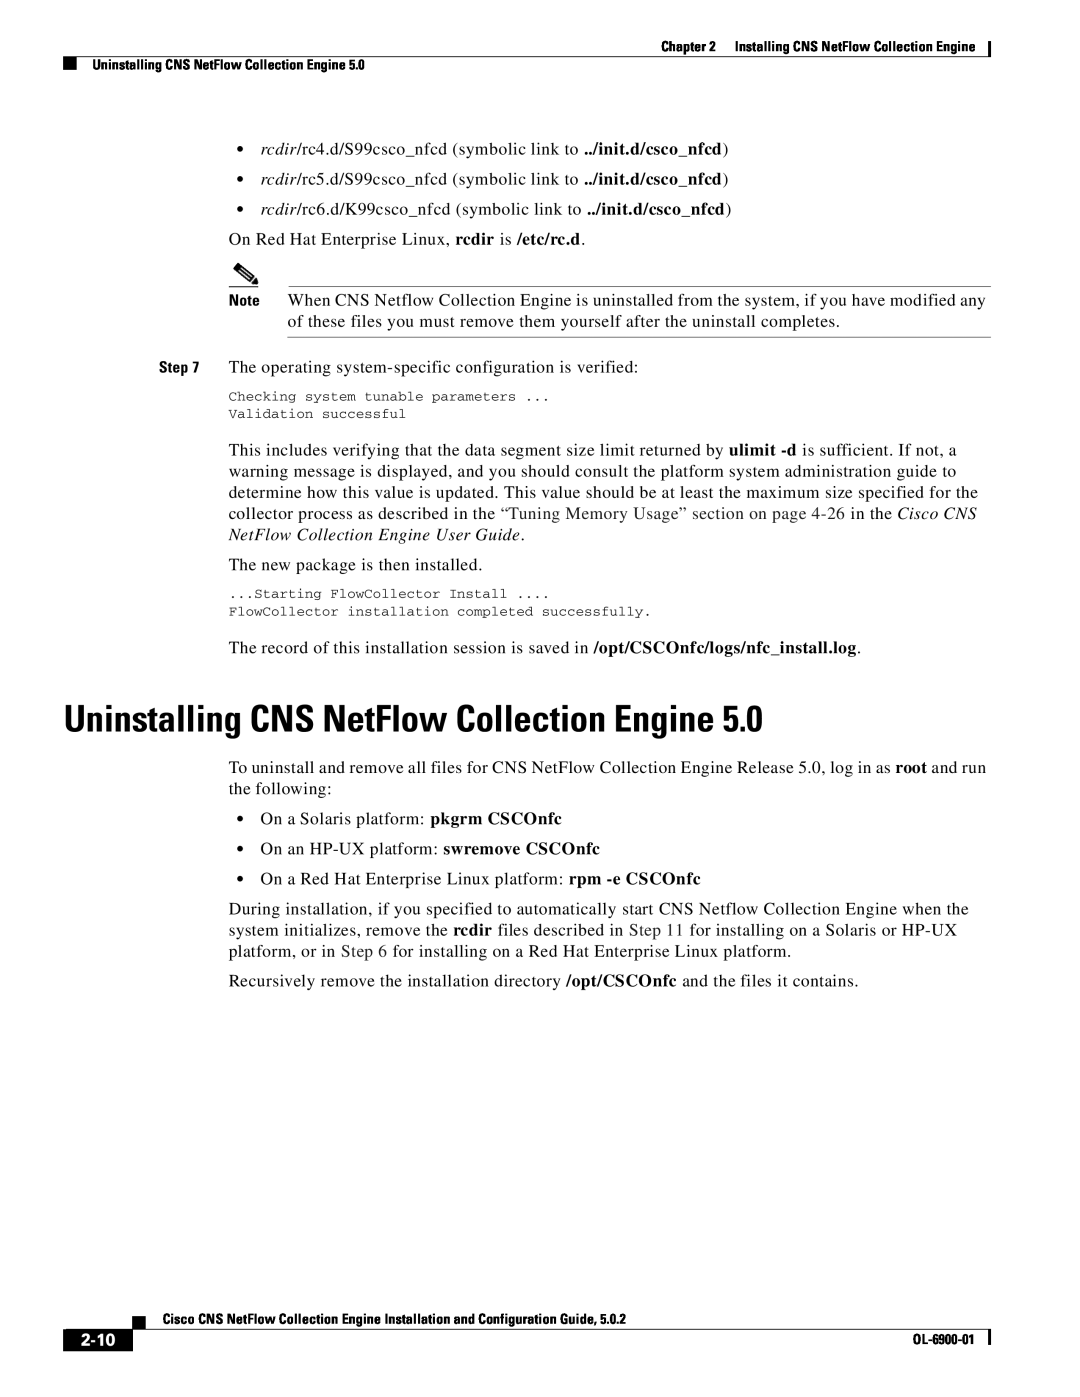 Cisco Systems OL-6900-01 manual Uninstalling CNS NetFlow Collection Engine, 2-10, Starting FlowCollector Install 